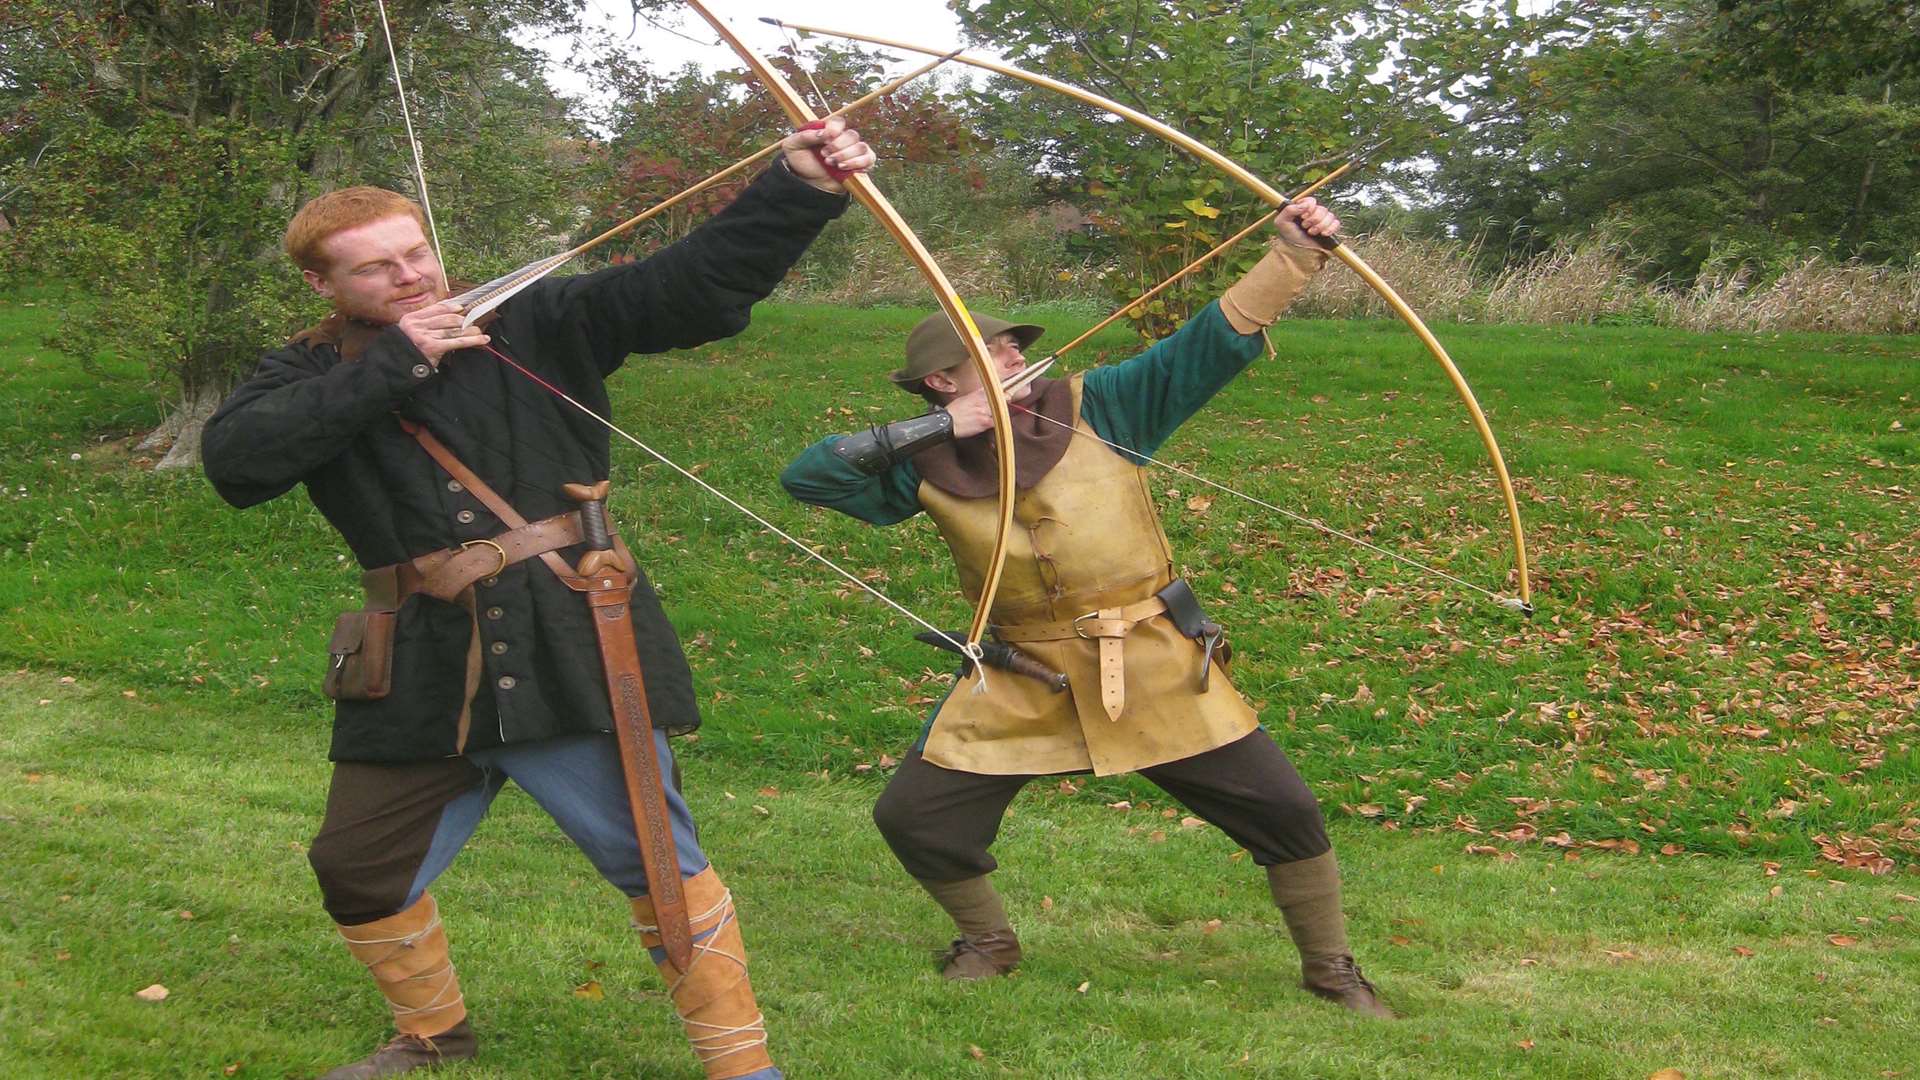 Check out the archers at Penshurst Place